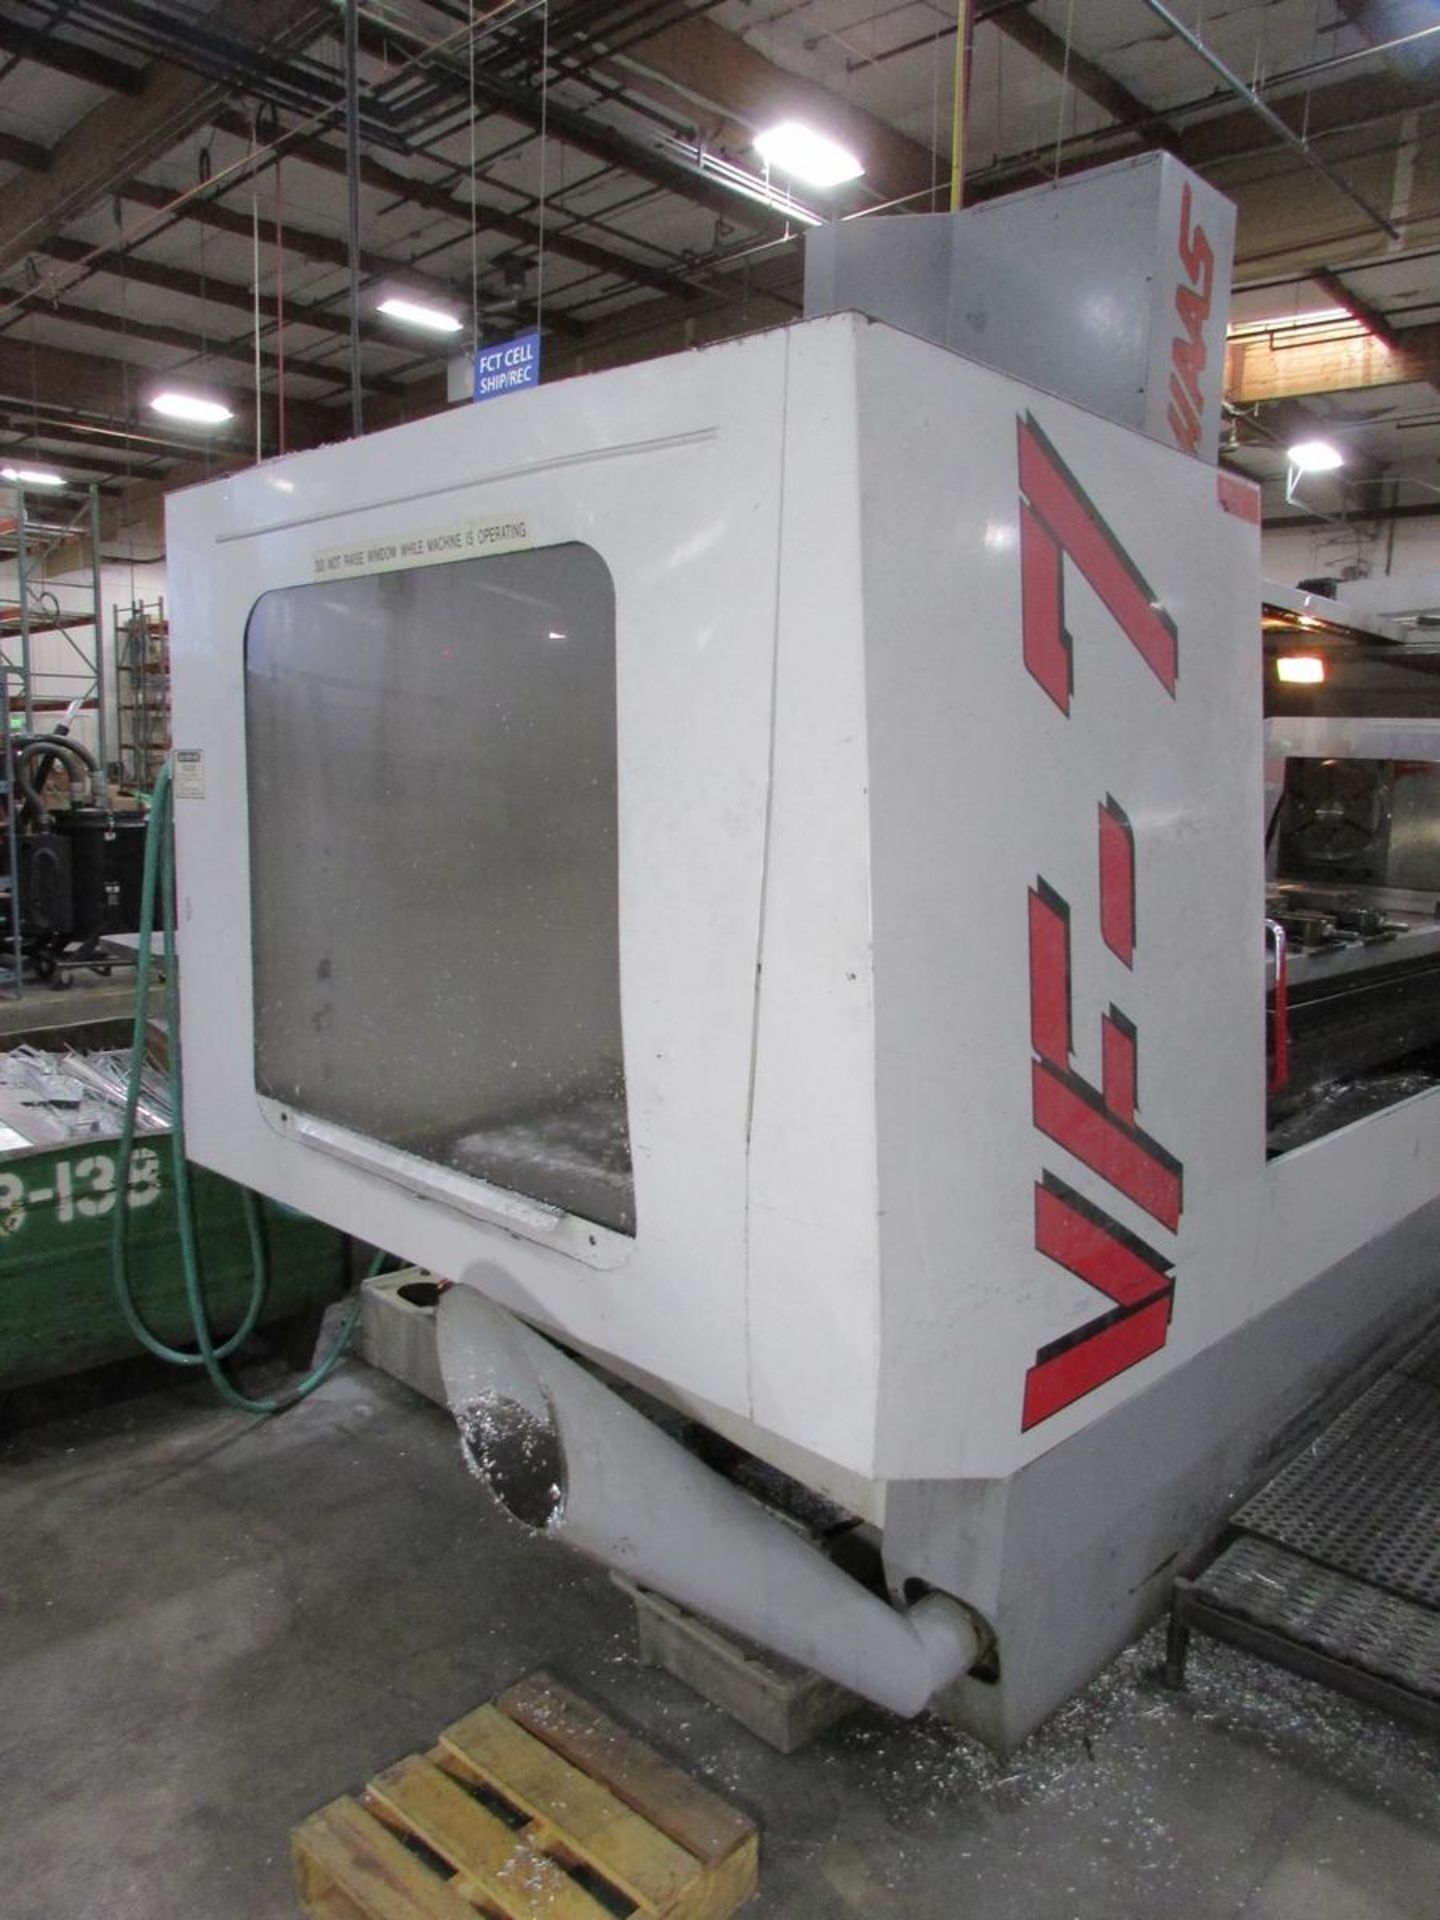 1997 Haas VF-7 4-Axis CNC Vertical Maching Center - Image 27 of 30